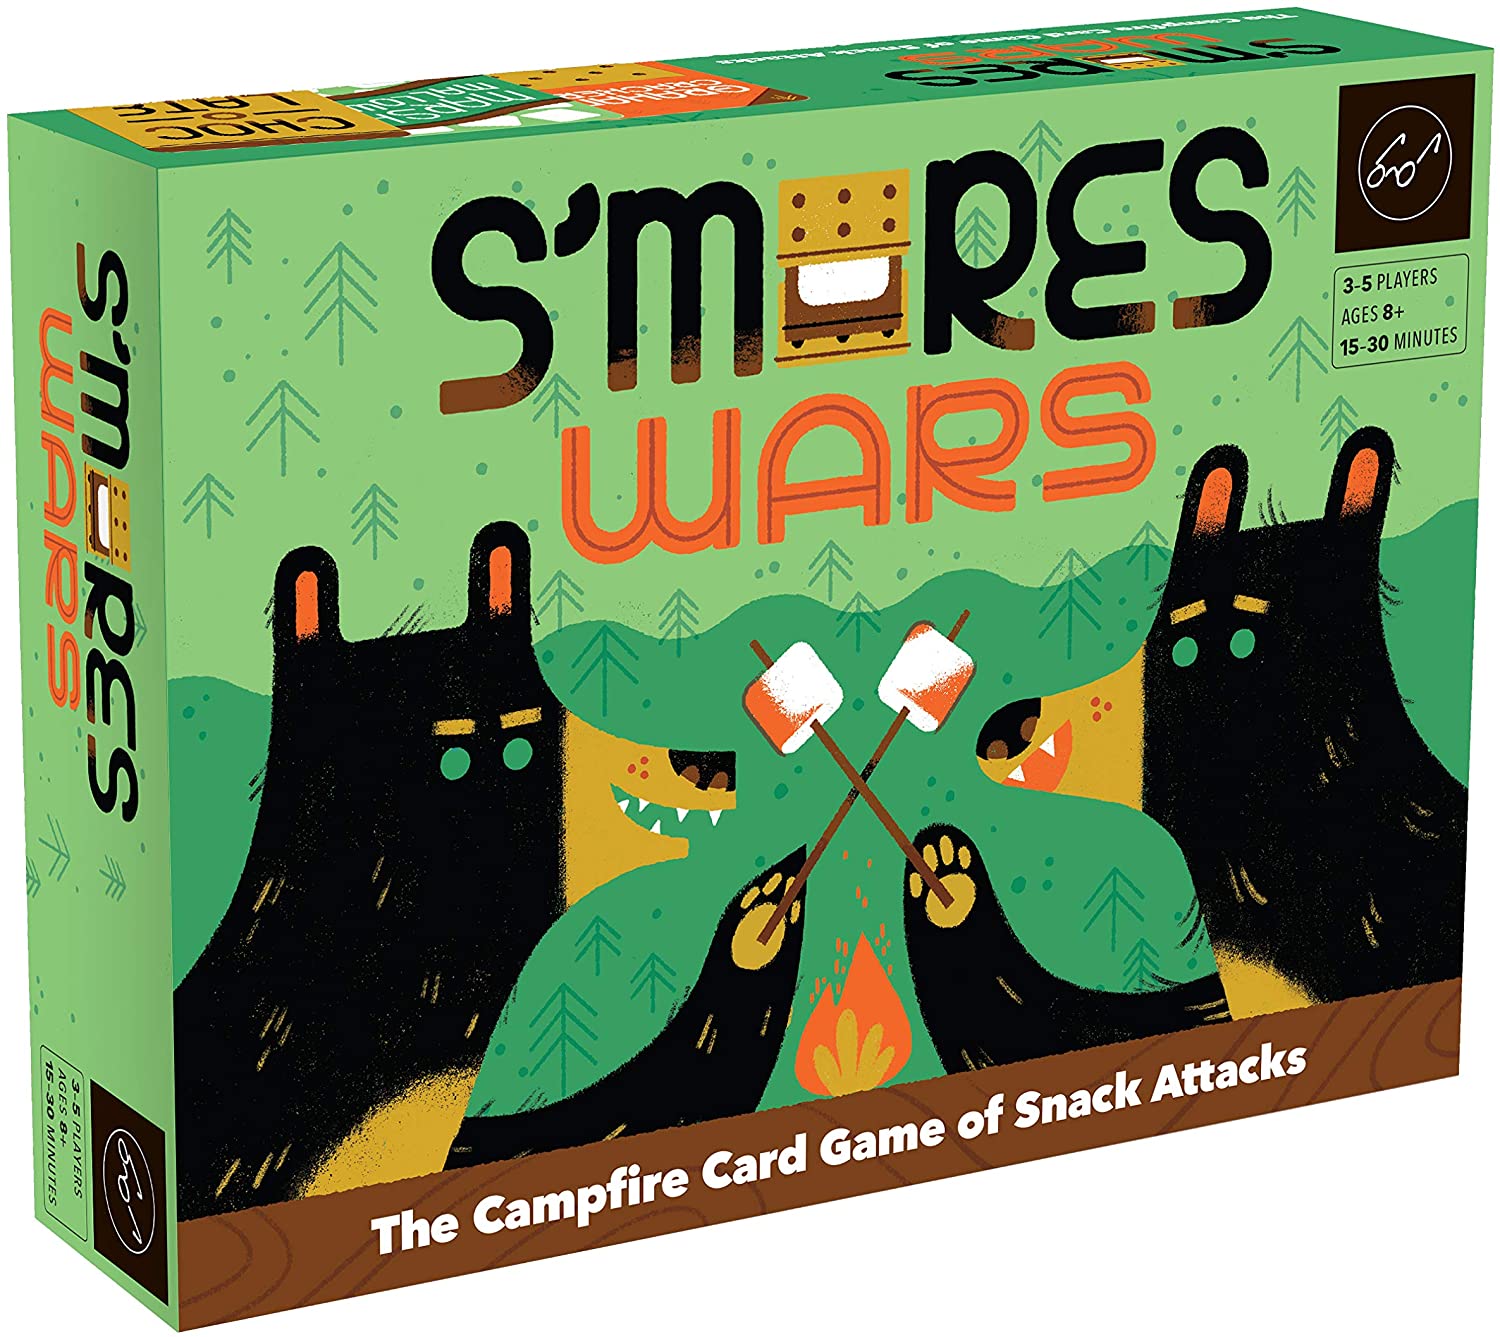 S'mores Wars: The Campfire Card Game of Snack Attacks (Competitive Card-Drafting Marshmallow Game for the Whole Family, Fast and Fun Food-Themed Card Game)